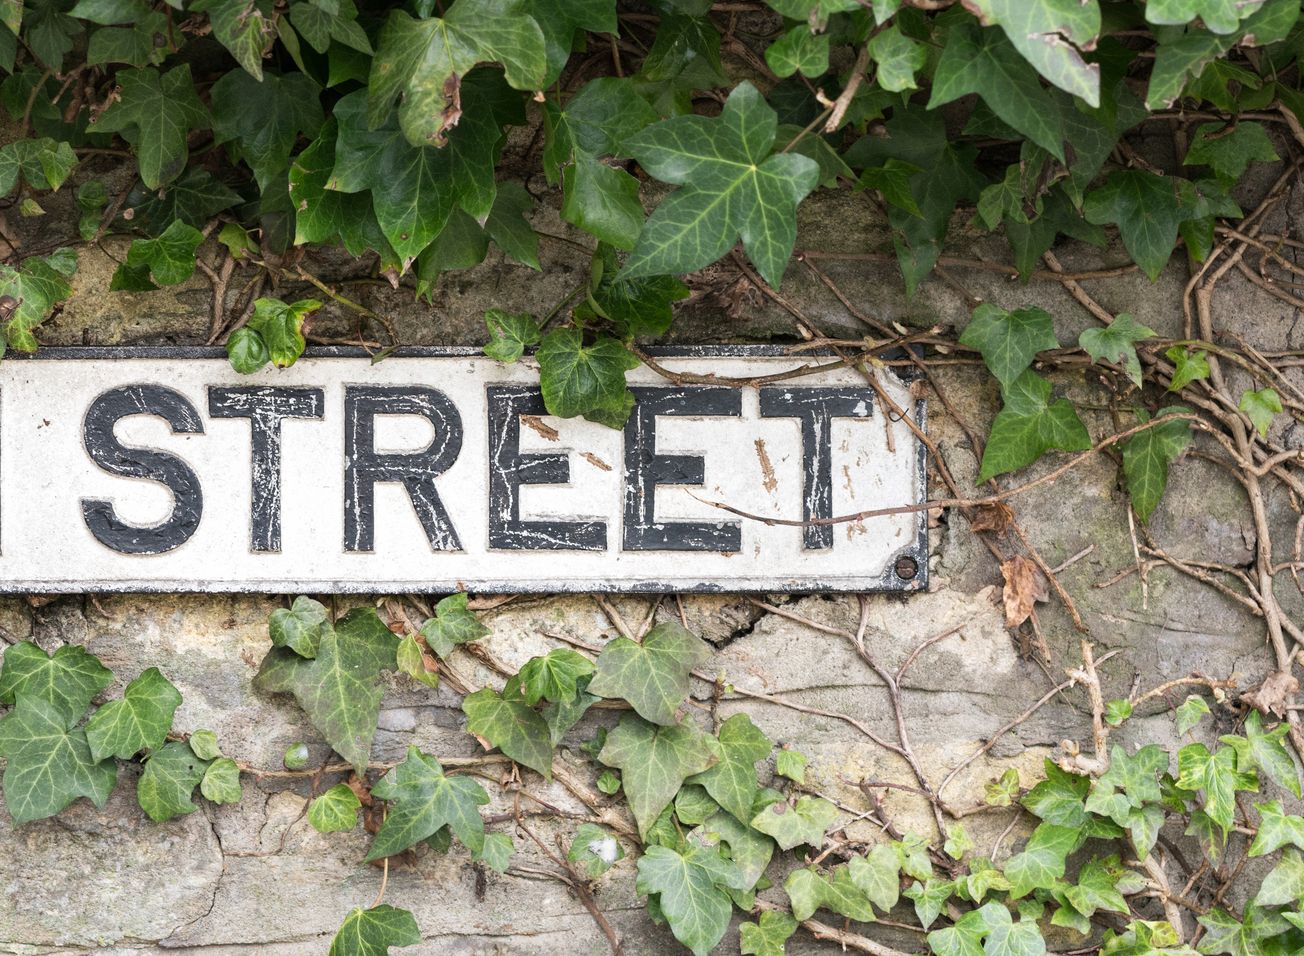 High Street sign in England